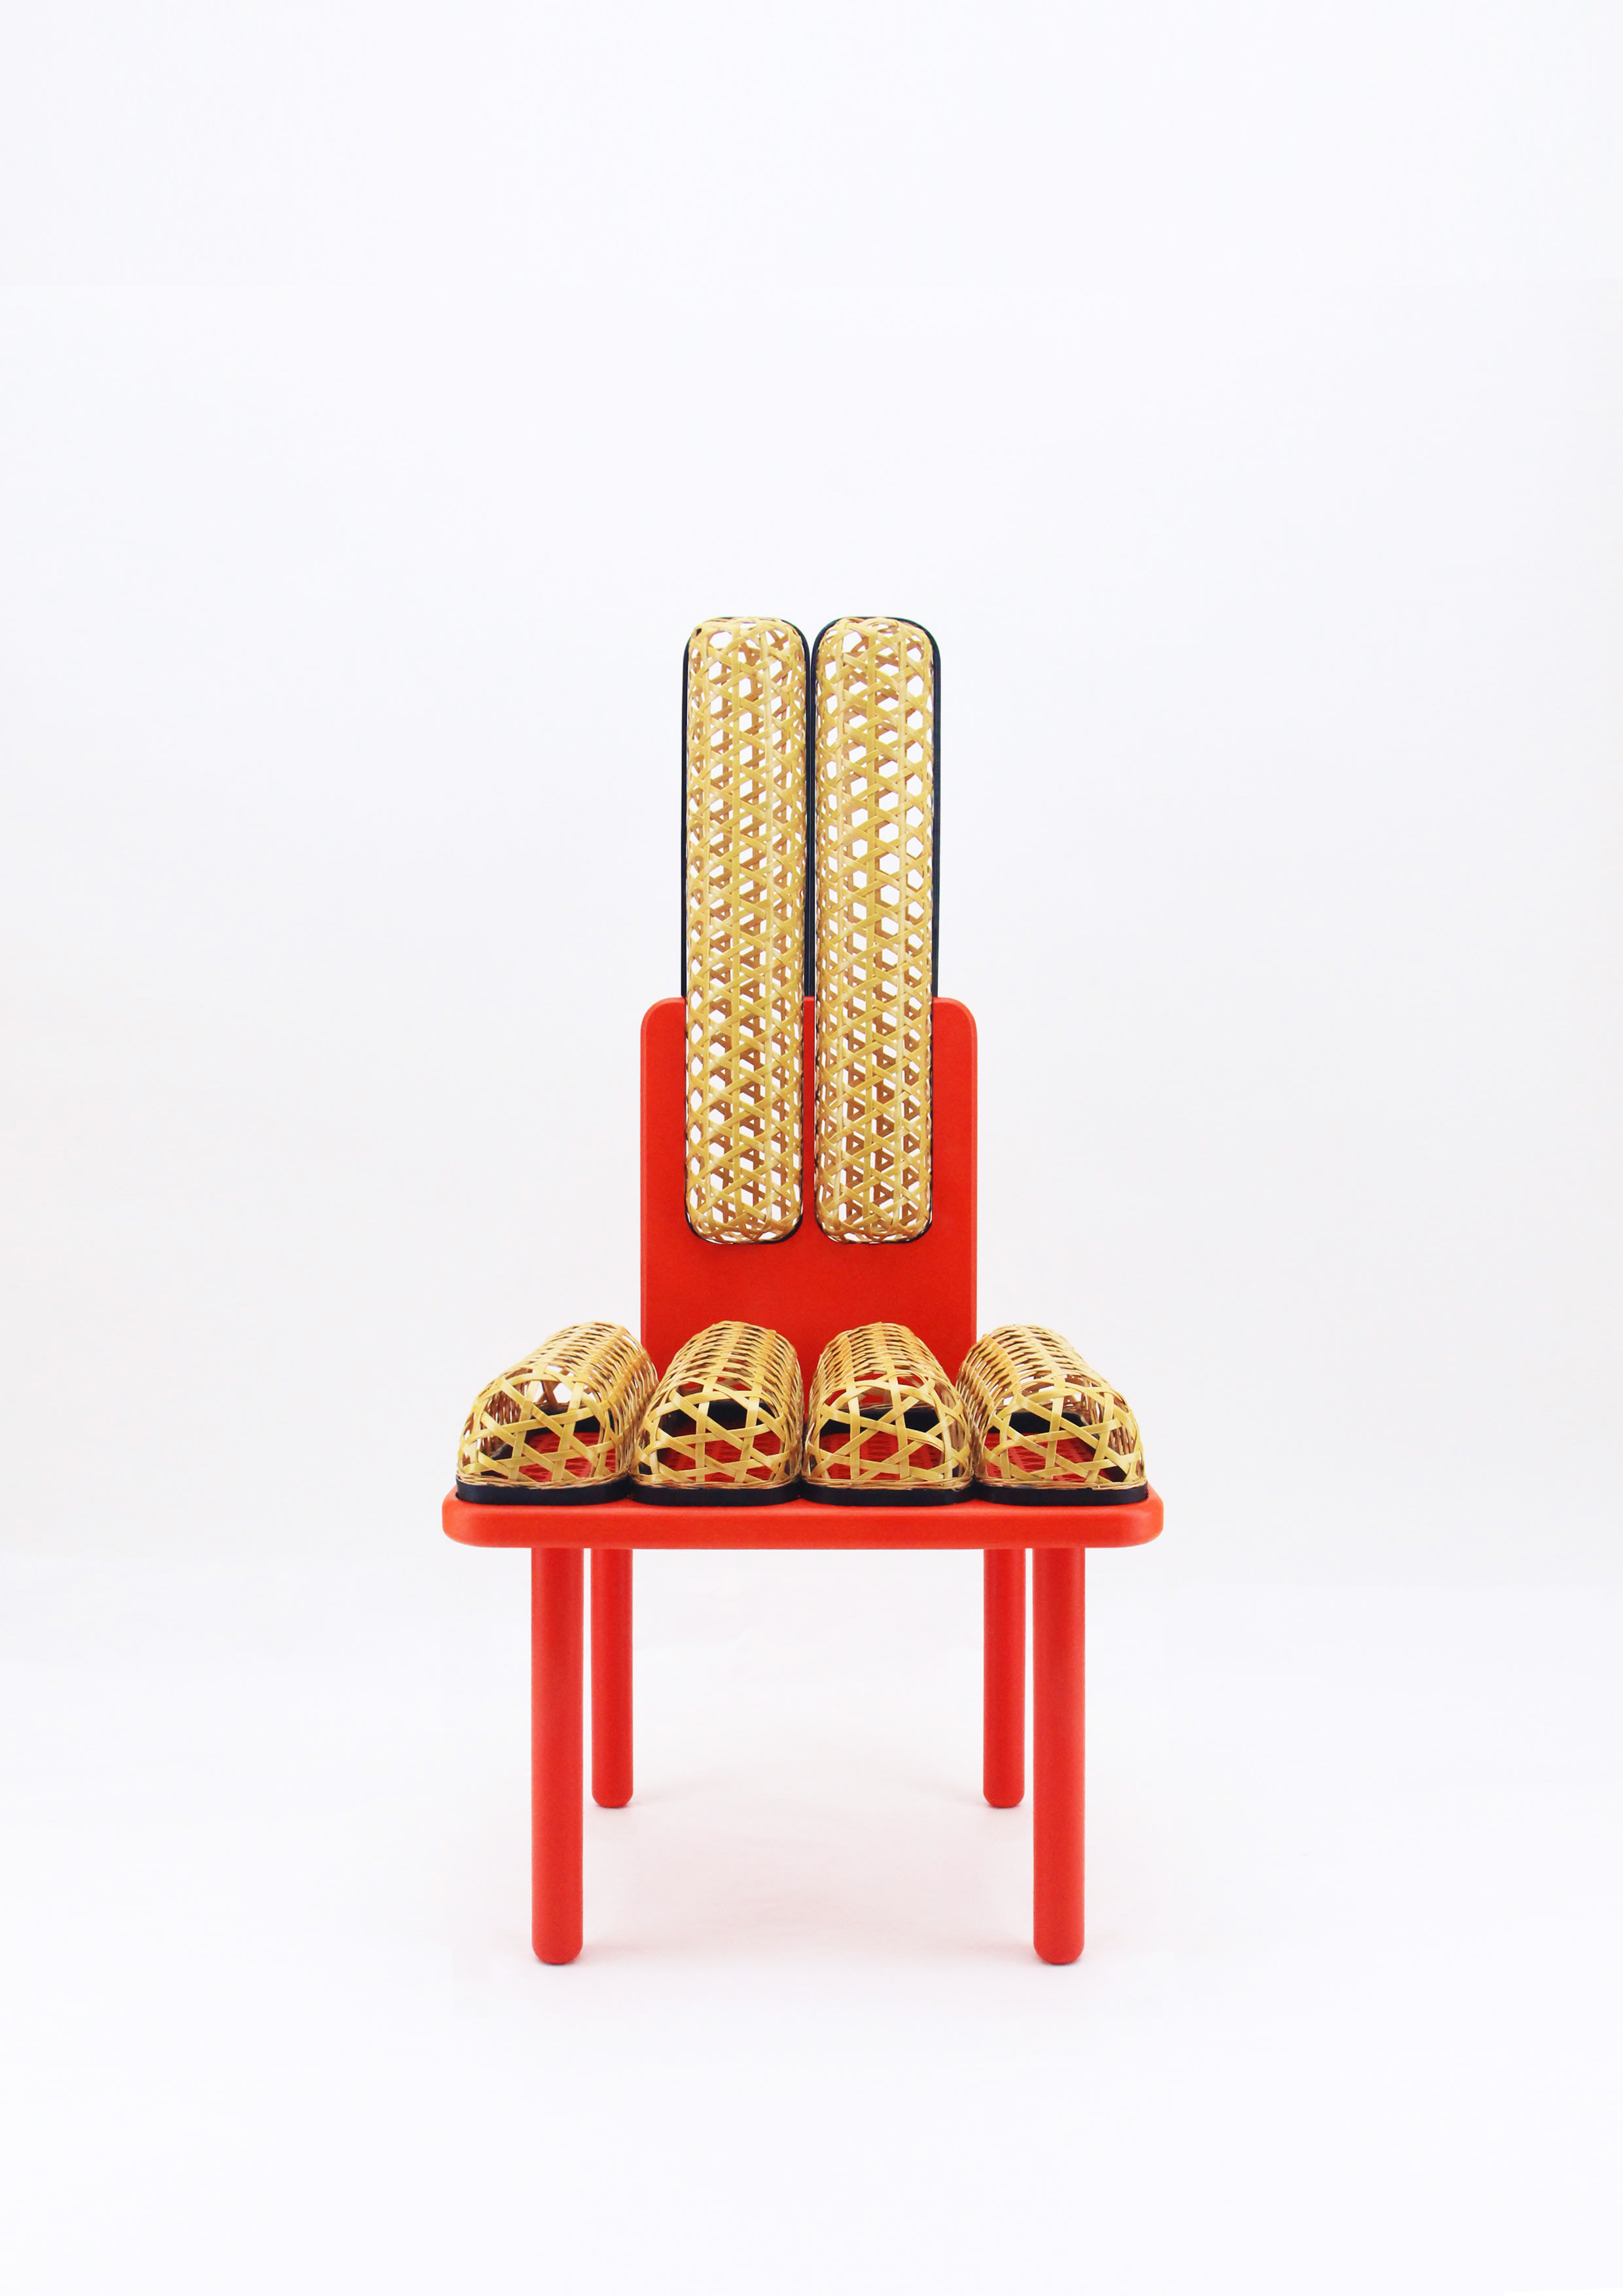 DT23_MAD_Mingyu_Xu-Parallel-Bamboo-Chair.jpg